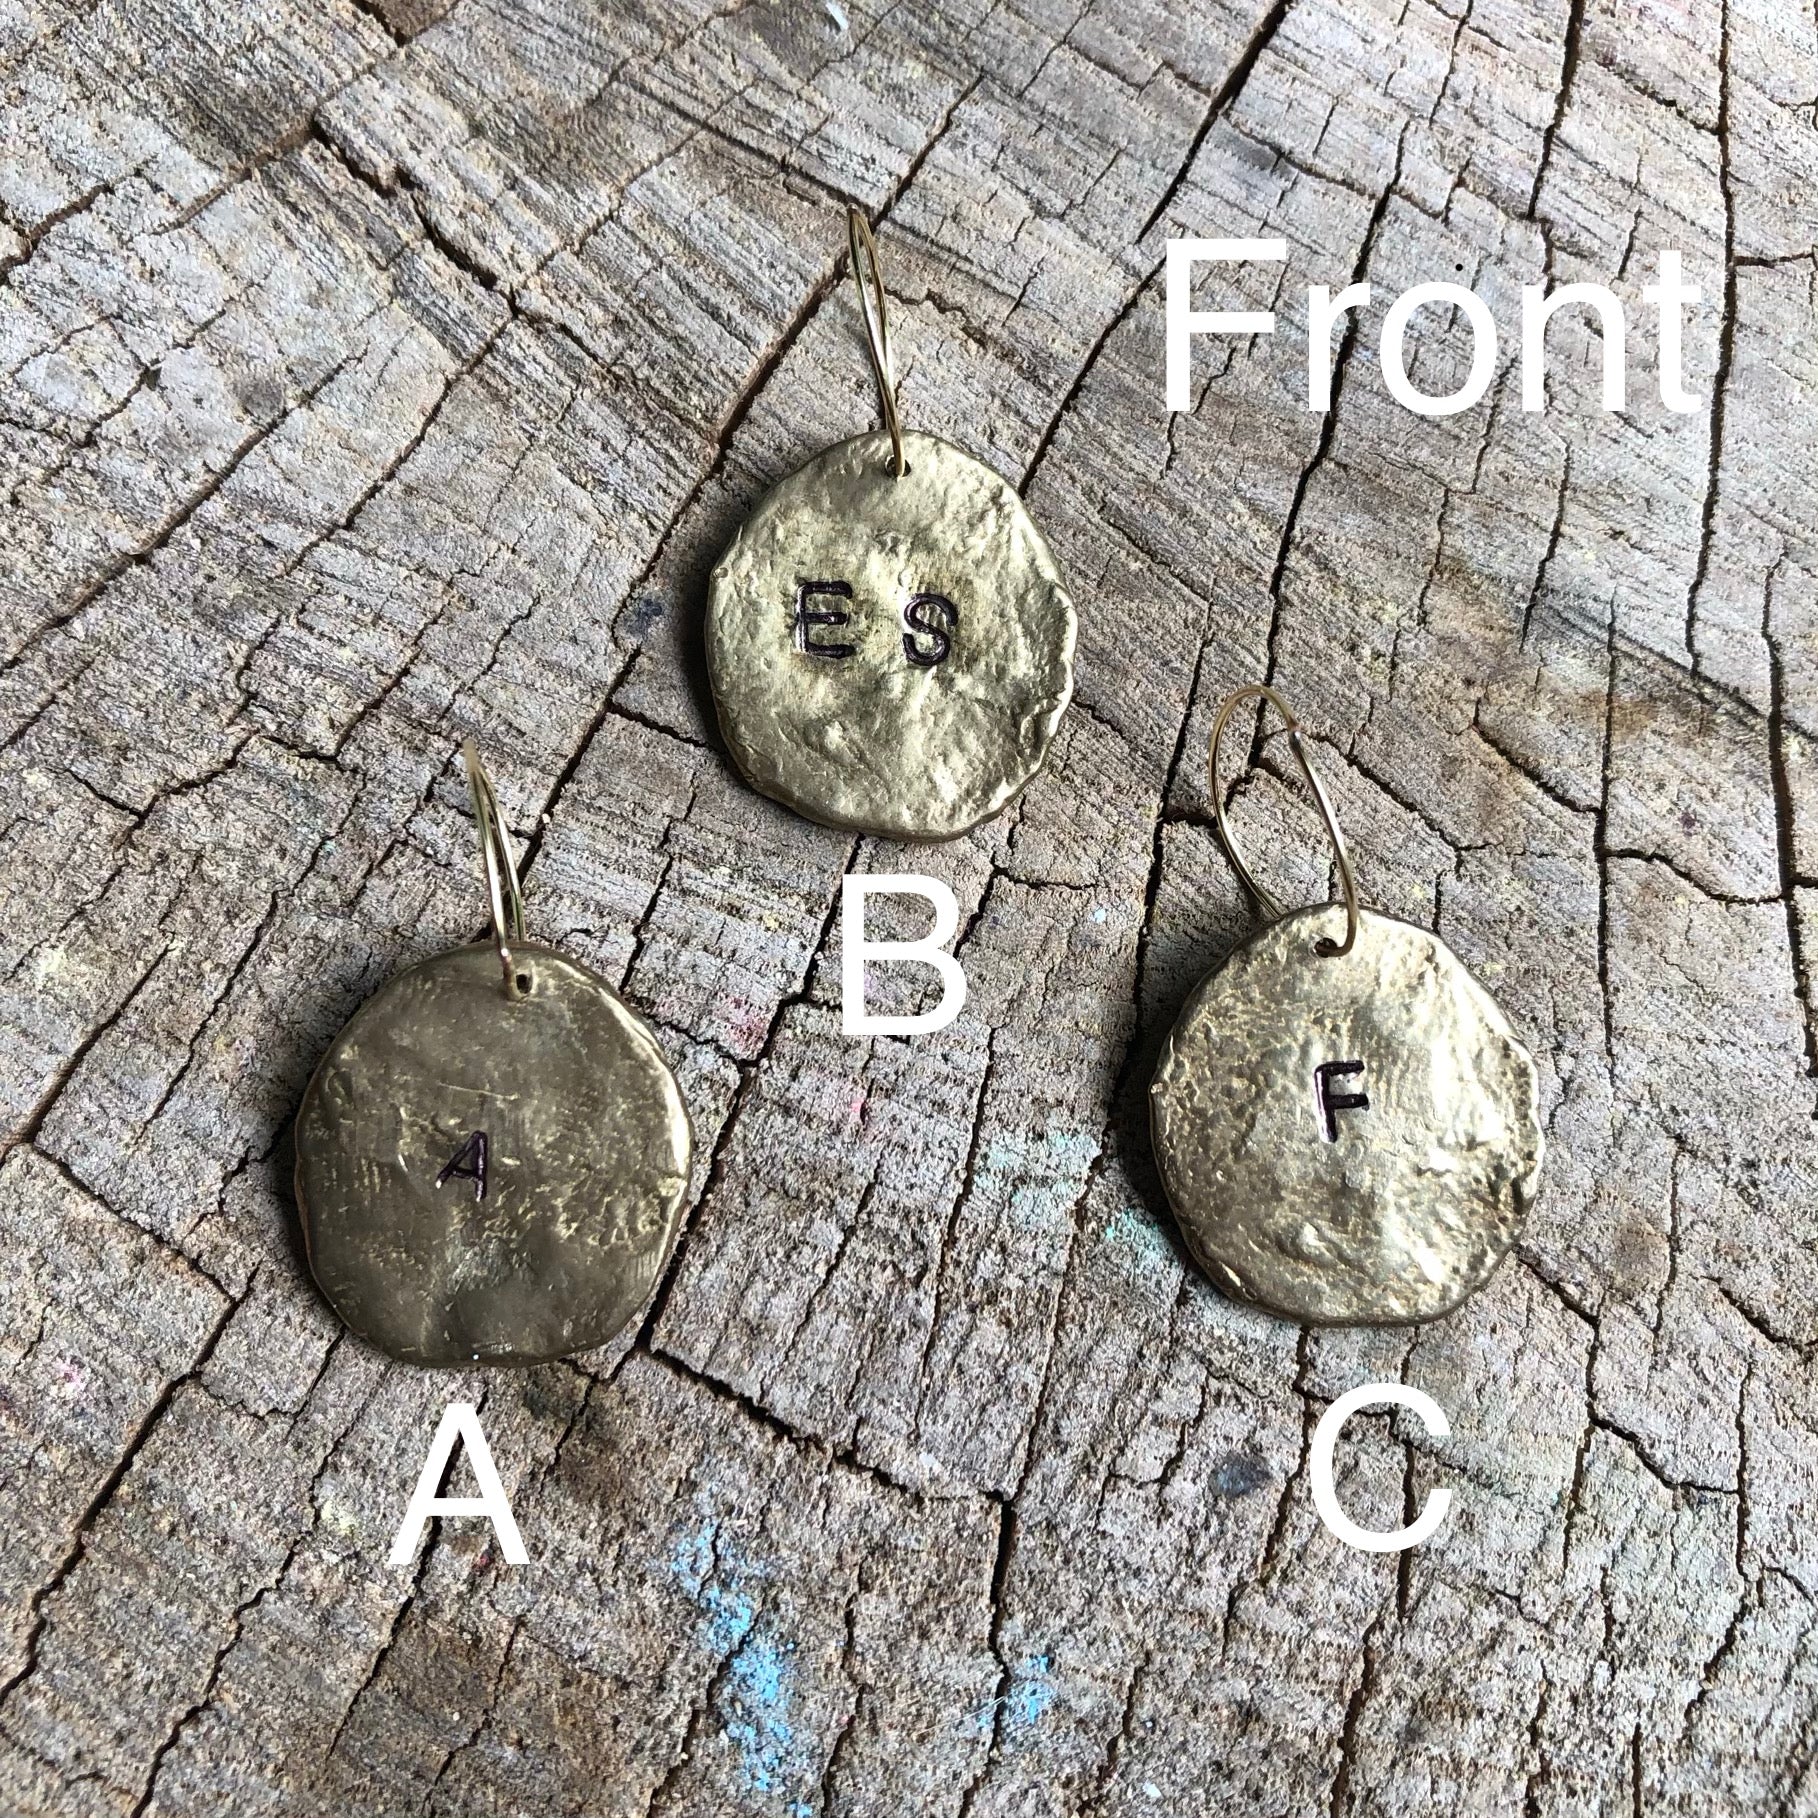 Stamped Charms